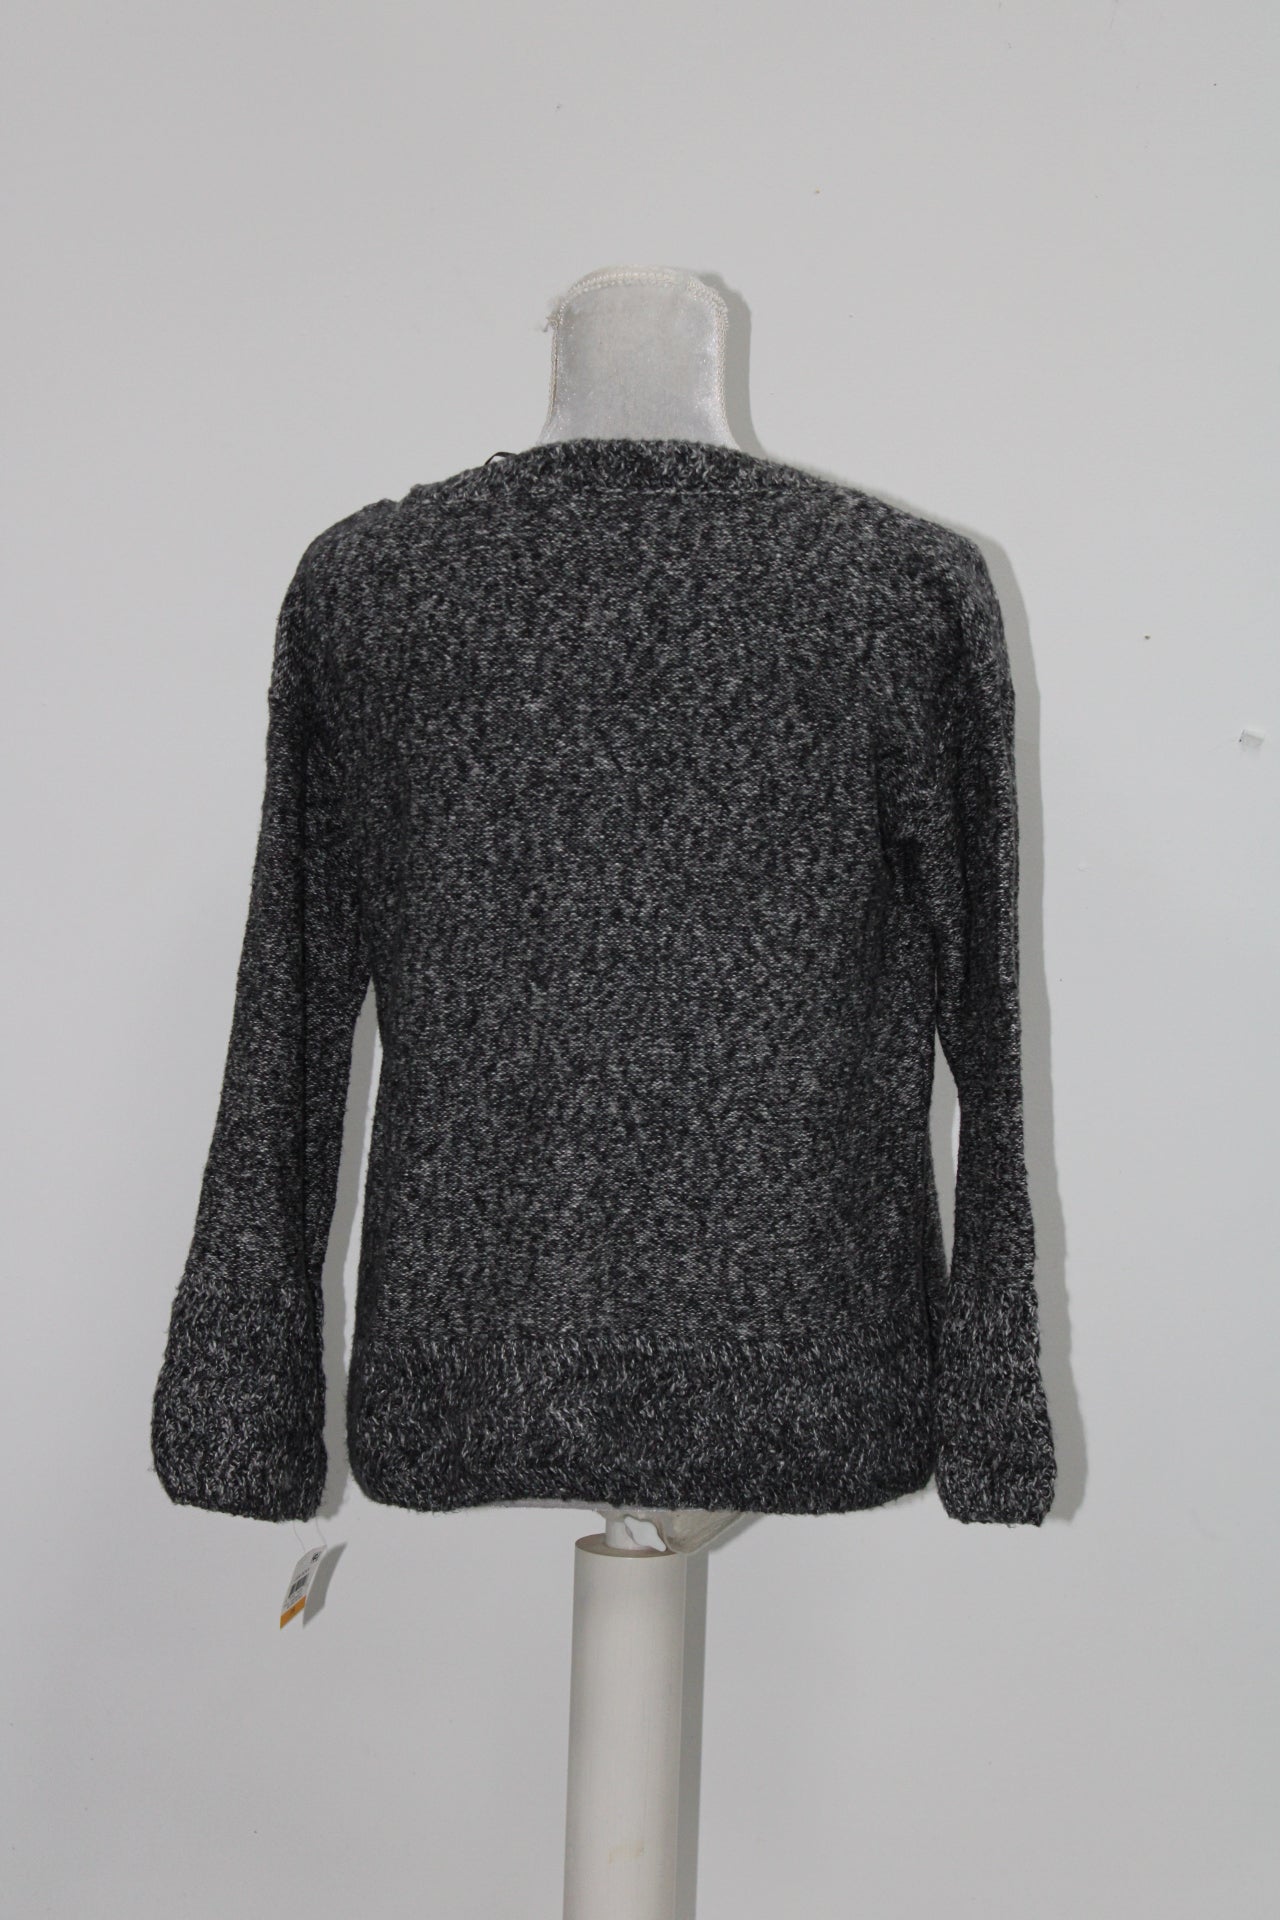 STYLE & CO Sweater Boxy Body Marl Pullover GRAY PS